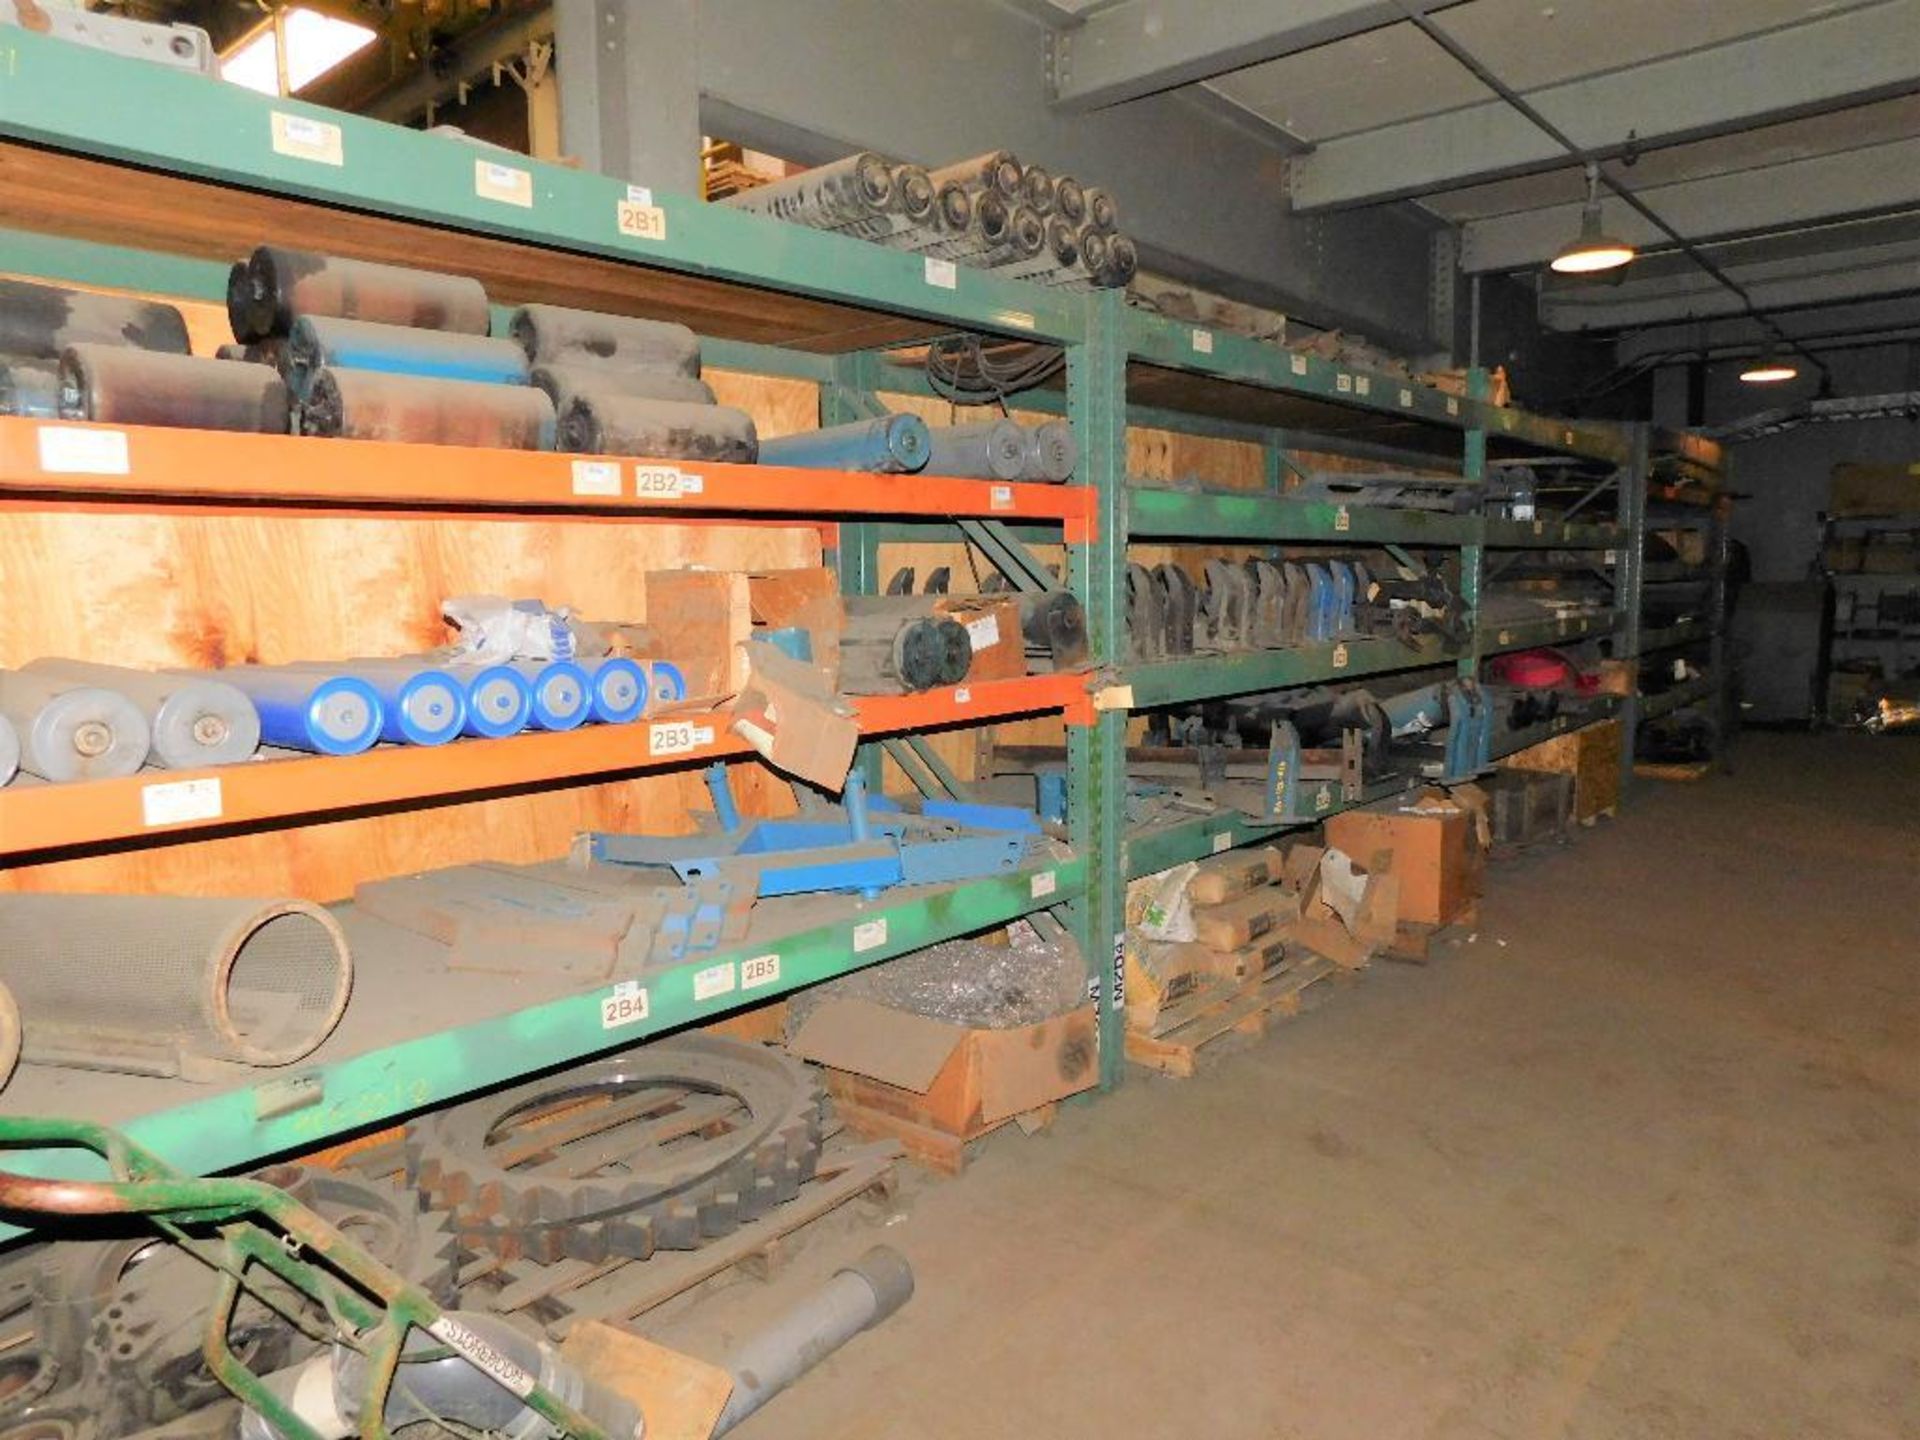 Assortes (2) Ros 8' Pallet Rack with Contents of Conveyor and Pump Parts.